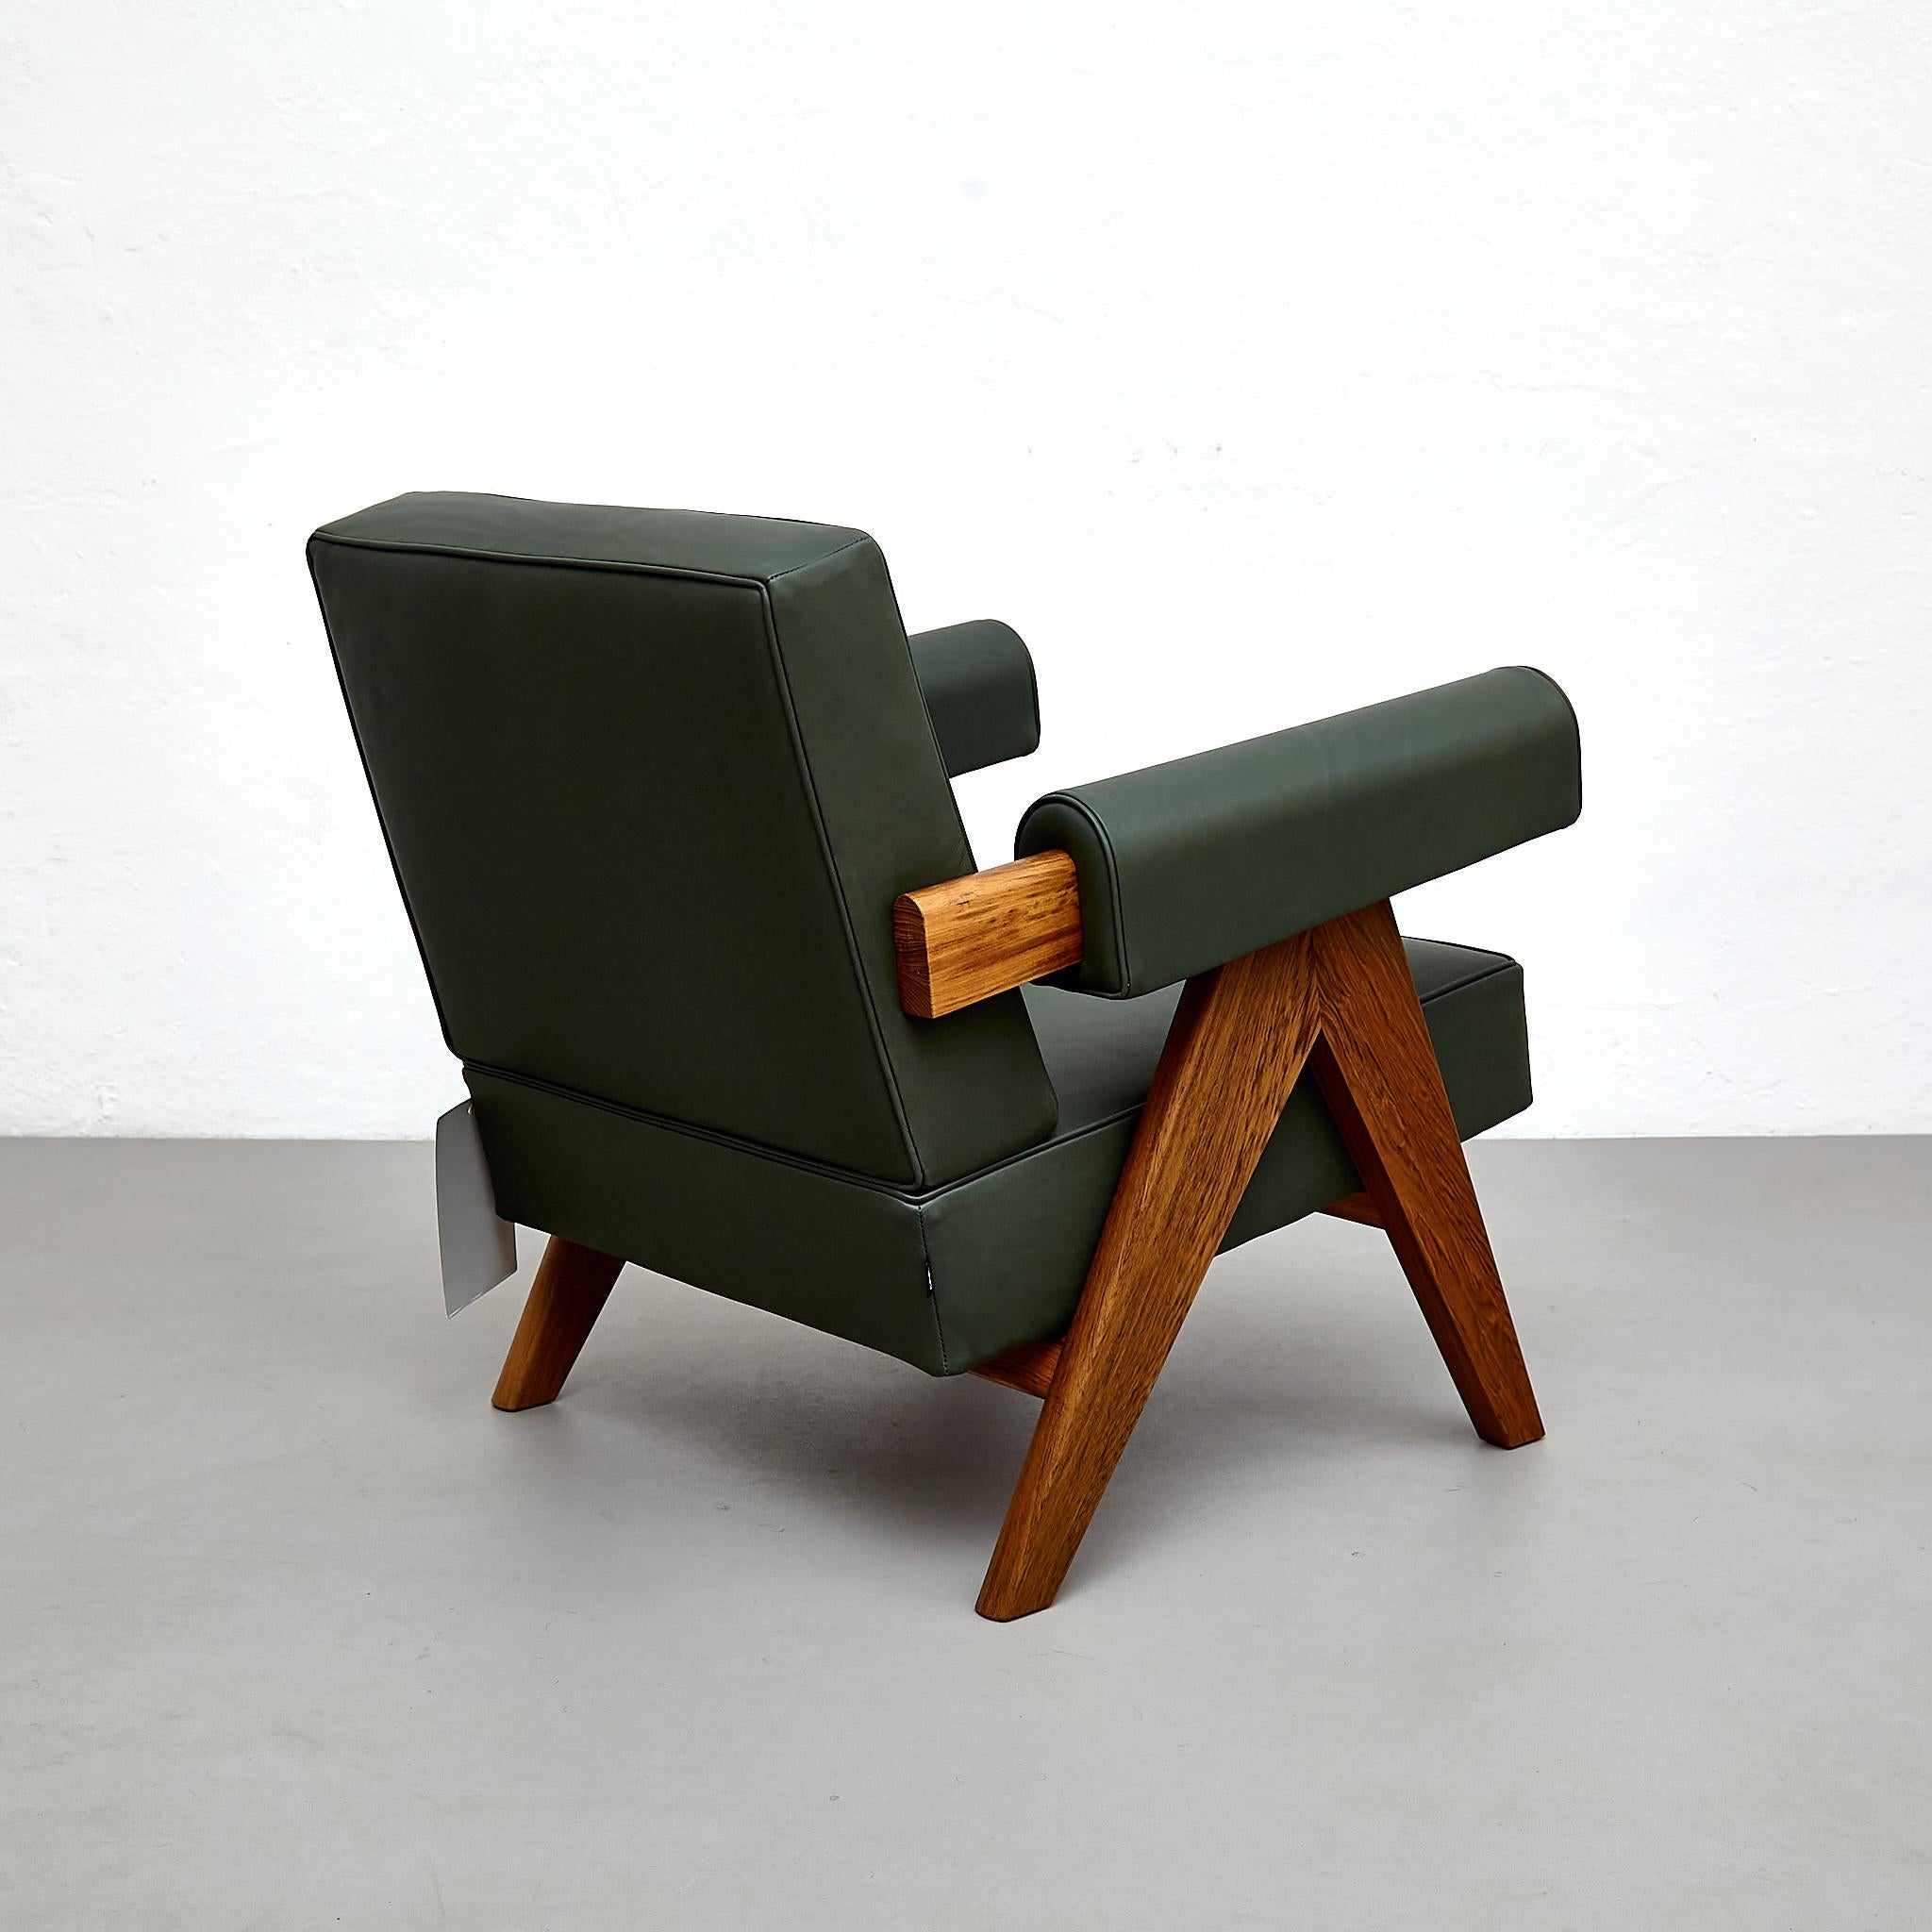 Set of Two Pierre Jeanneret Teak Wood Green Leather Armchair by Cassina For Sale 6